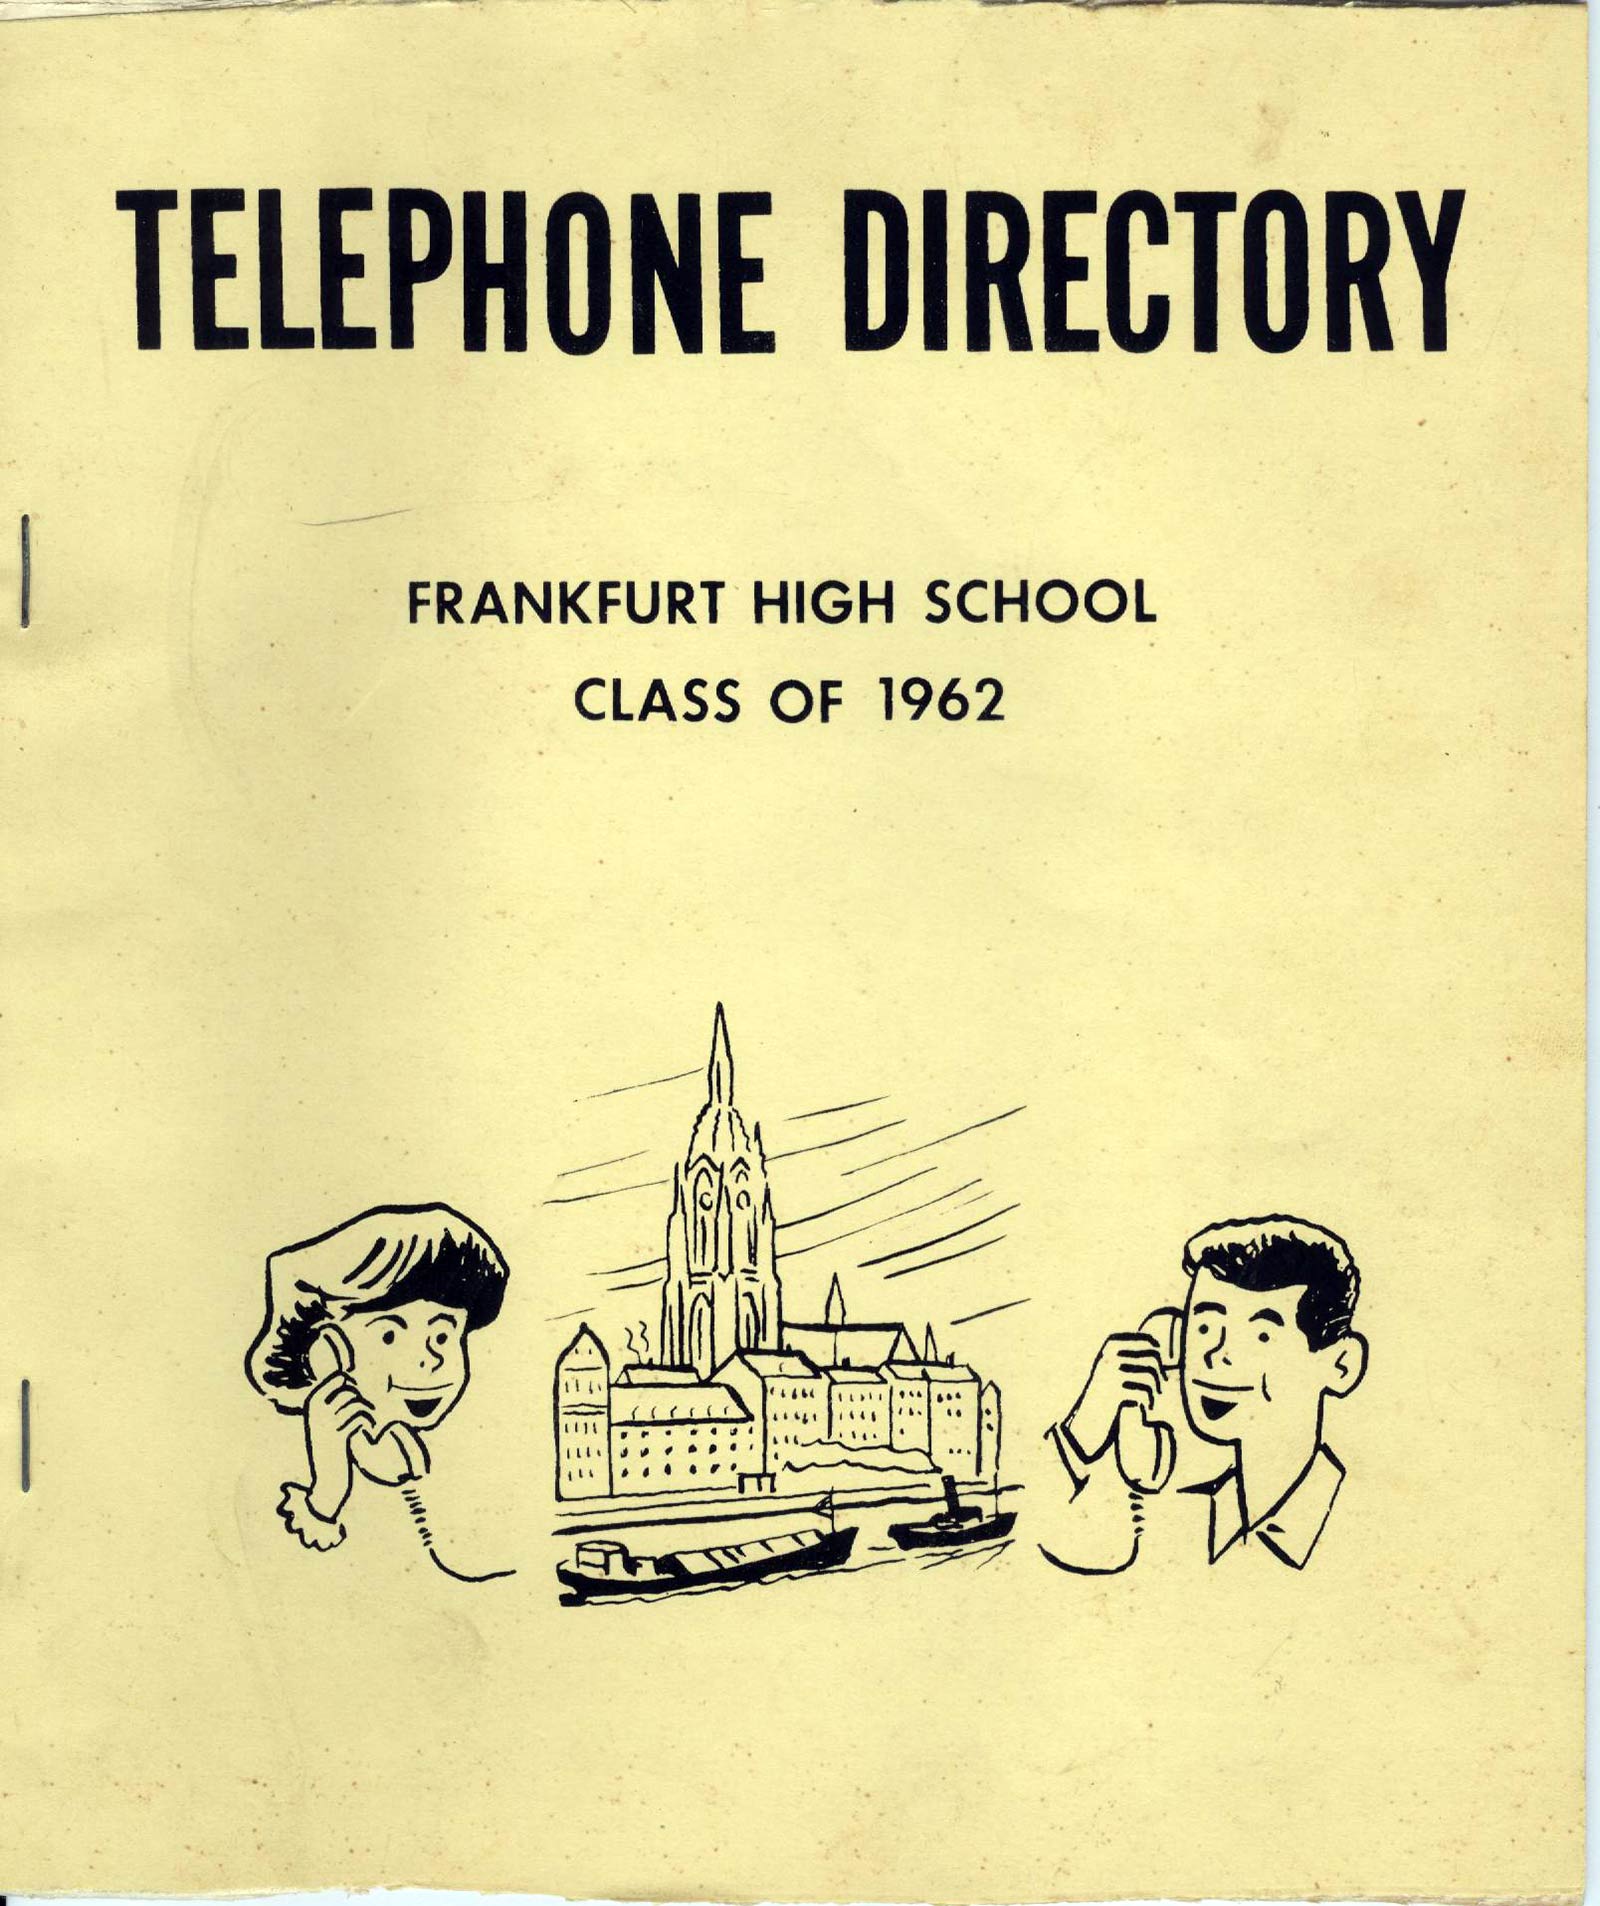 FHS phone directory cover